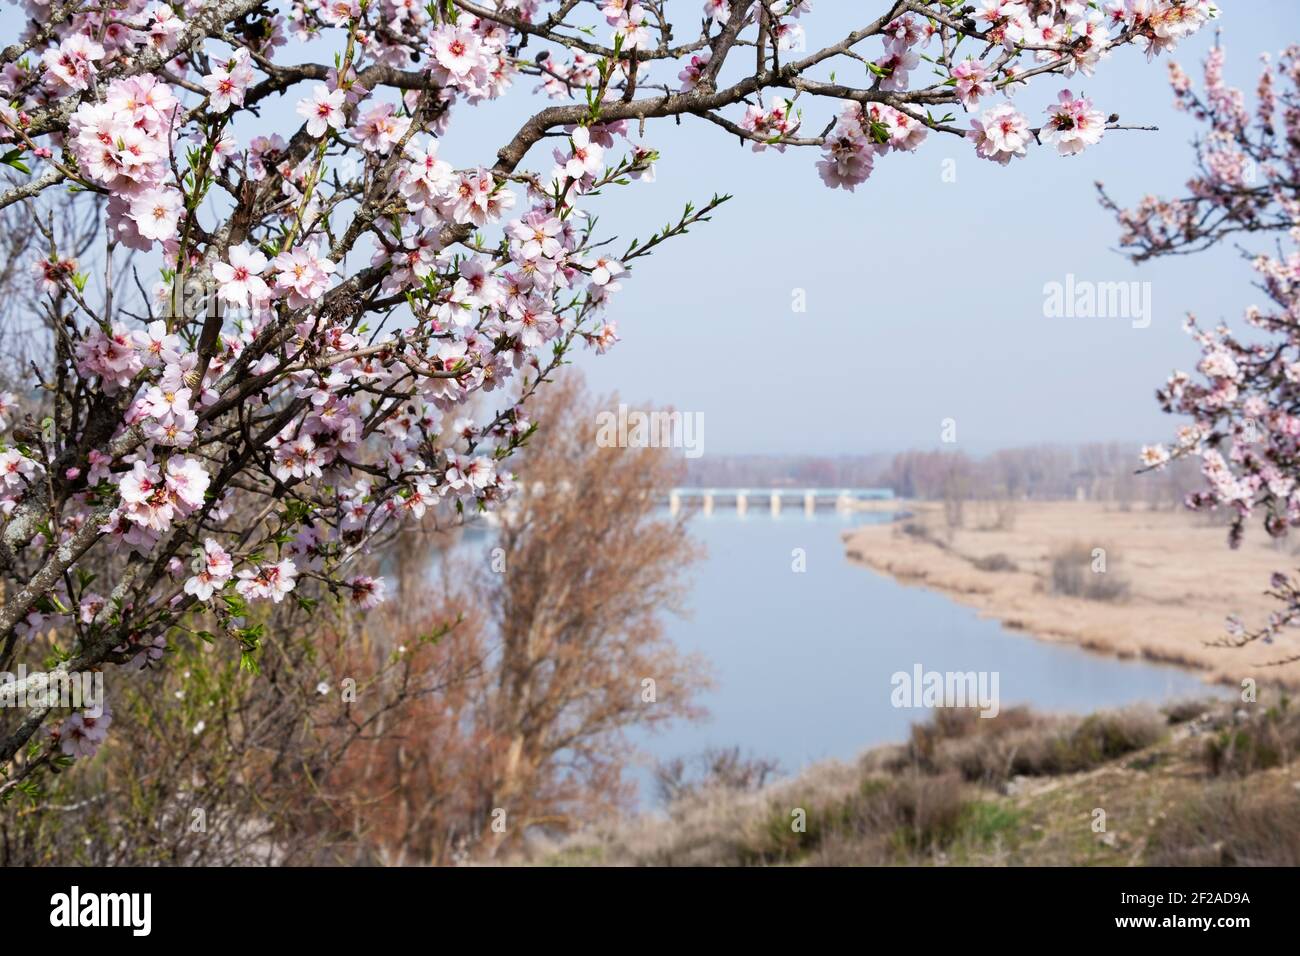 Almond trees in bloom in Castronuño located on the banks of the Duero River in Valladolid, Spain Stock Photo